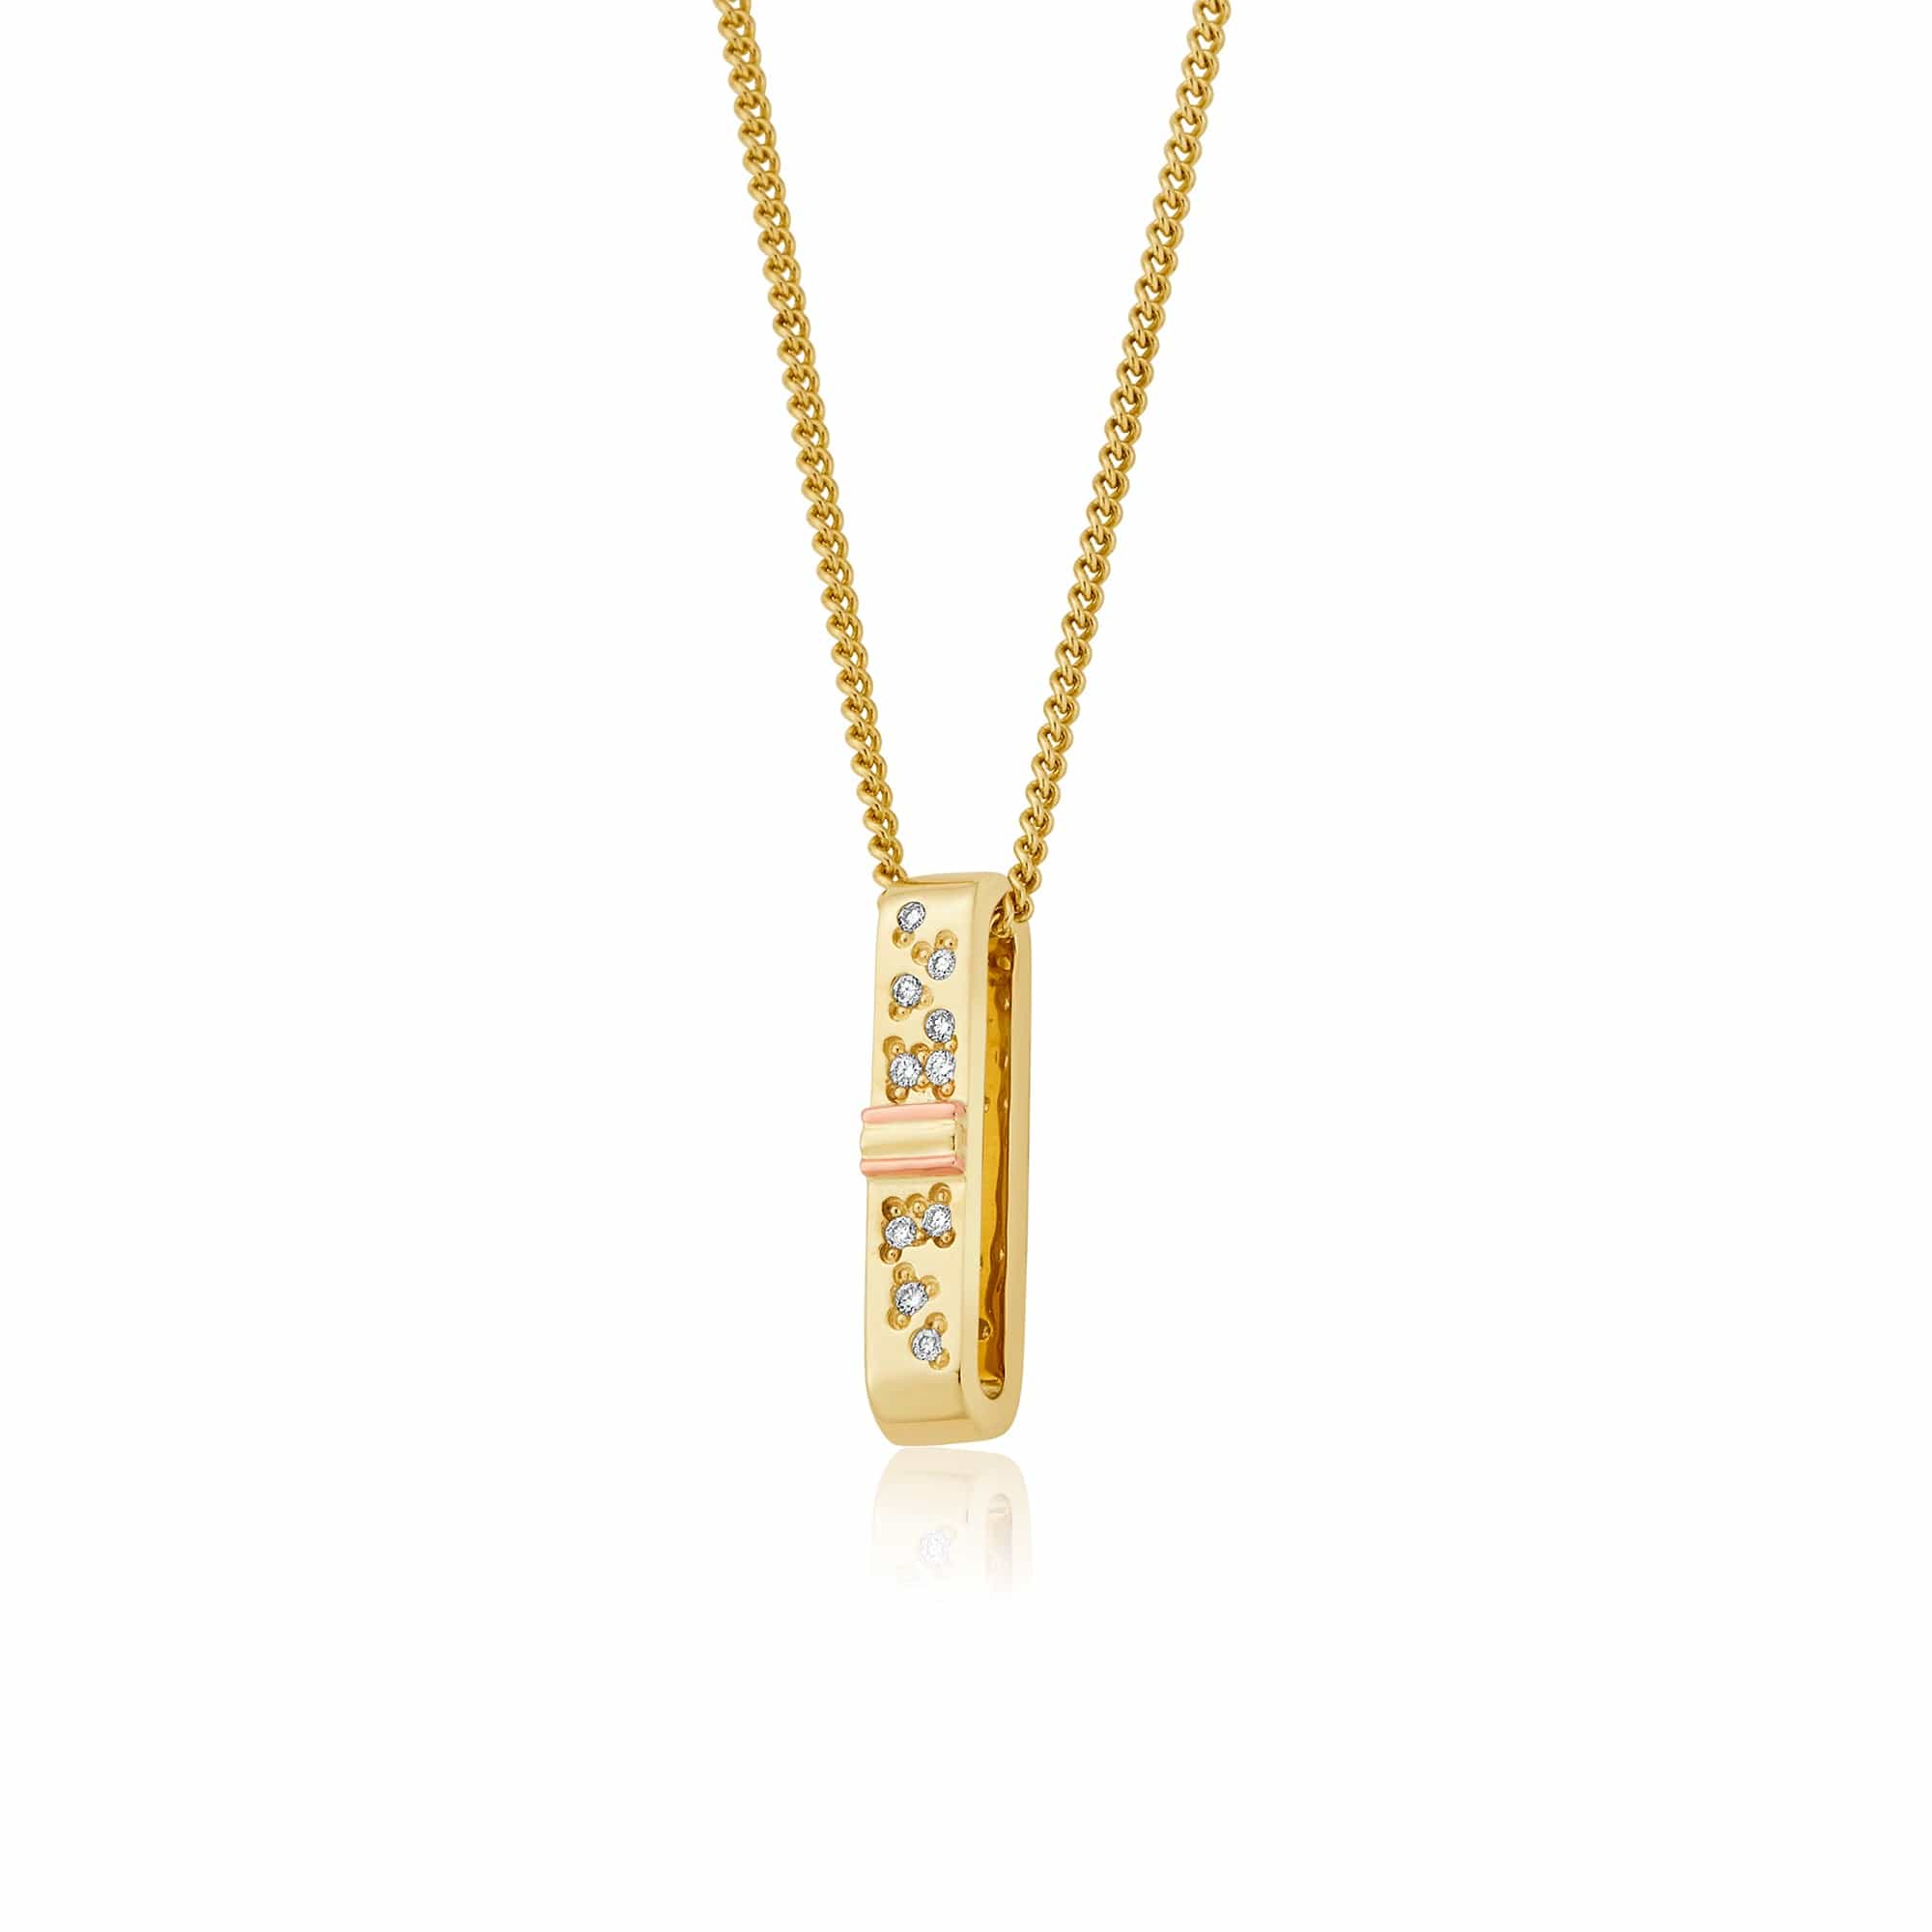 Clogau Welsh Royalty Pendant - Necklaces from Bradbury's The Jewellers UK